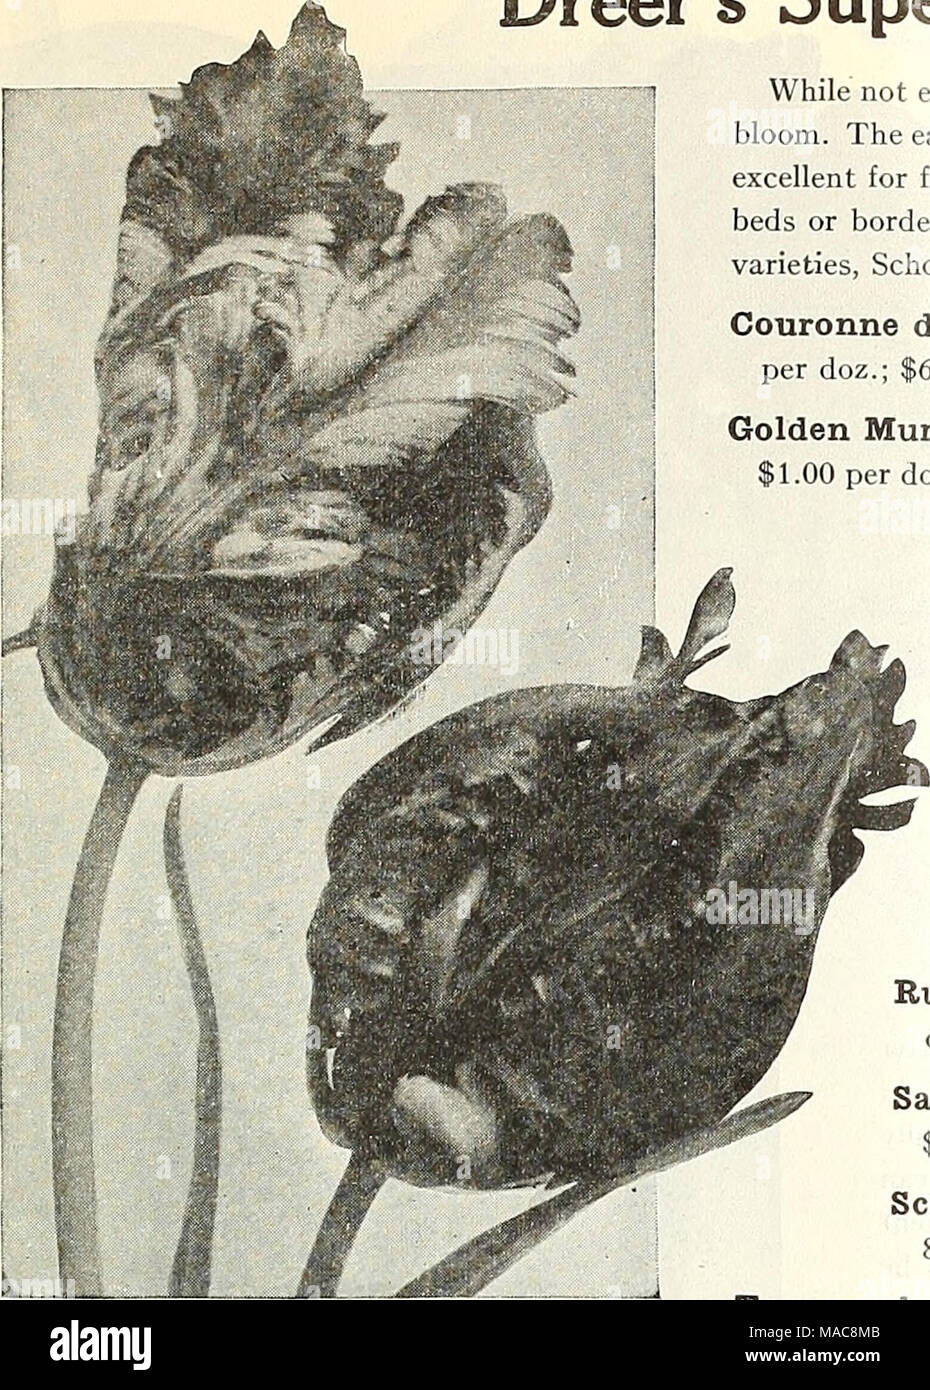 . Dreer's mid-summer list 1928 . COLLECTIONS OF DOUBLE TULIPS 3 each of the 10 varieties, 30 bulbs $2 25 postpaid 6 each of the 10 varieties. 60 bulbs 3 60 &quot; 12 each of the 10 varieties, 120 bulbs 7 00 &quot; 25 each of the 10 varieties, 250 bulbs 13 50 ,,&quot; PARROT OR DRAGON TULIPS Very large flowers of singular and picturesque forms and brilliant colors; very beautiful and interesting. The petals are curiously fringed or cut. They form extravagantly showy flower beds or borders, are of endless variety of form and color, stand a long time when cut, and should be grown in every flower  Stock Photo